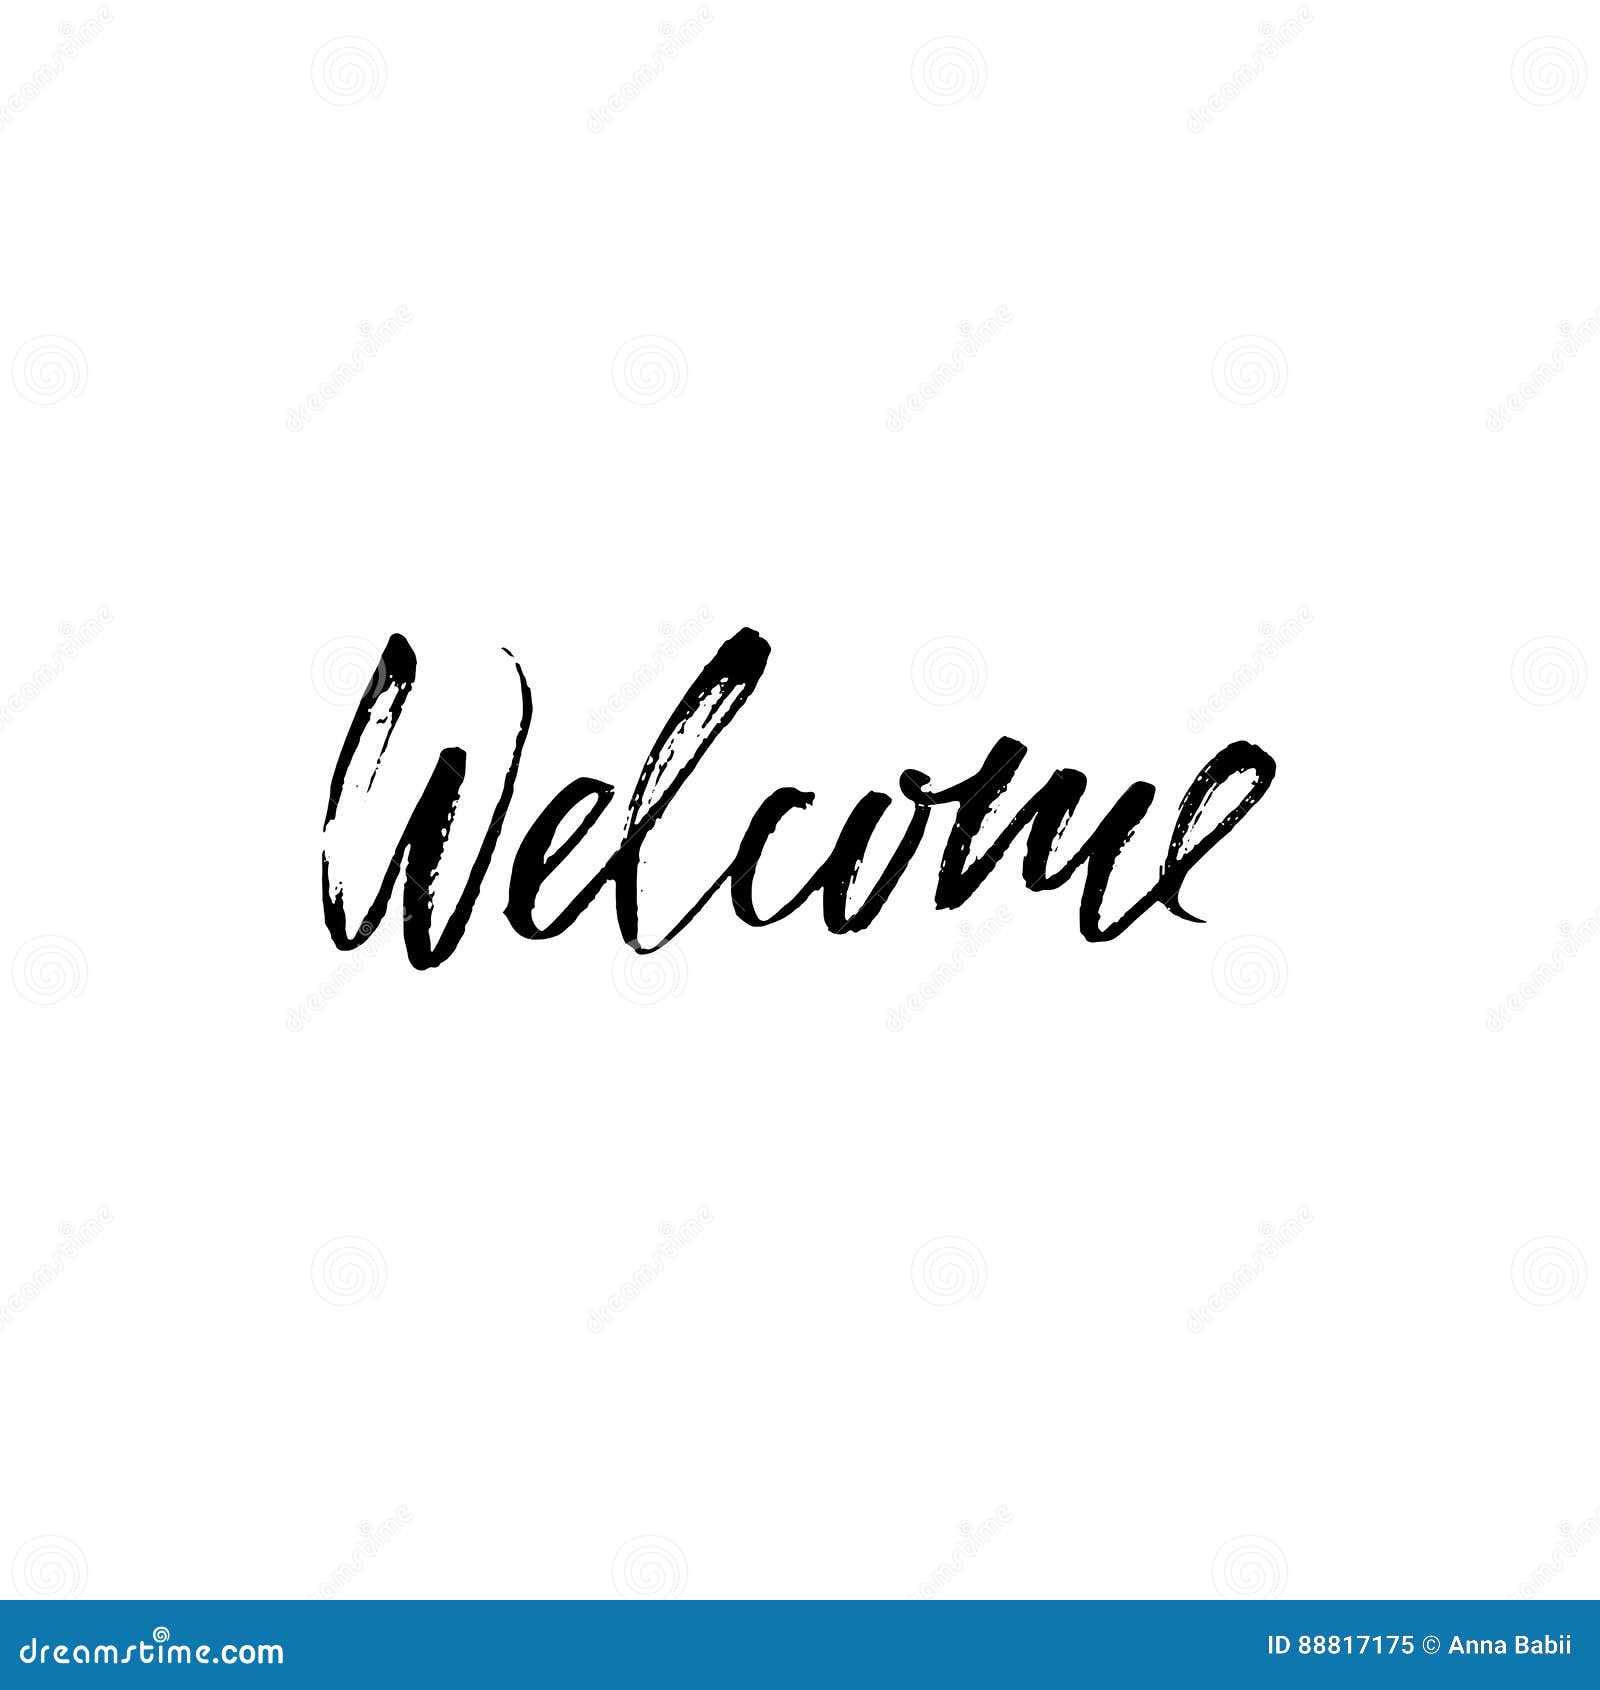 Welcome Inscription. Hand Drawn Design Elements. Black and White Vector ...